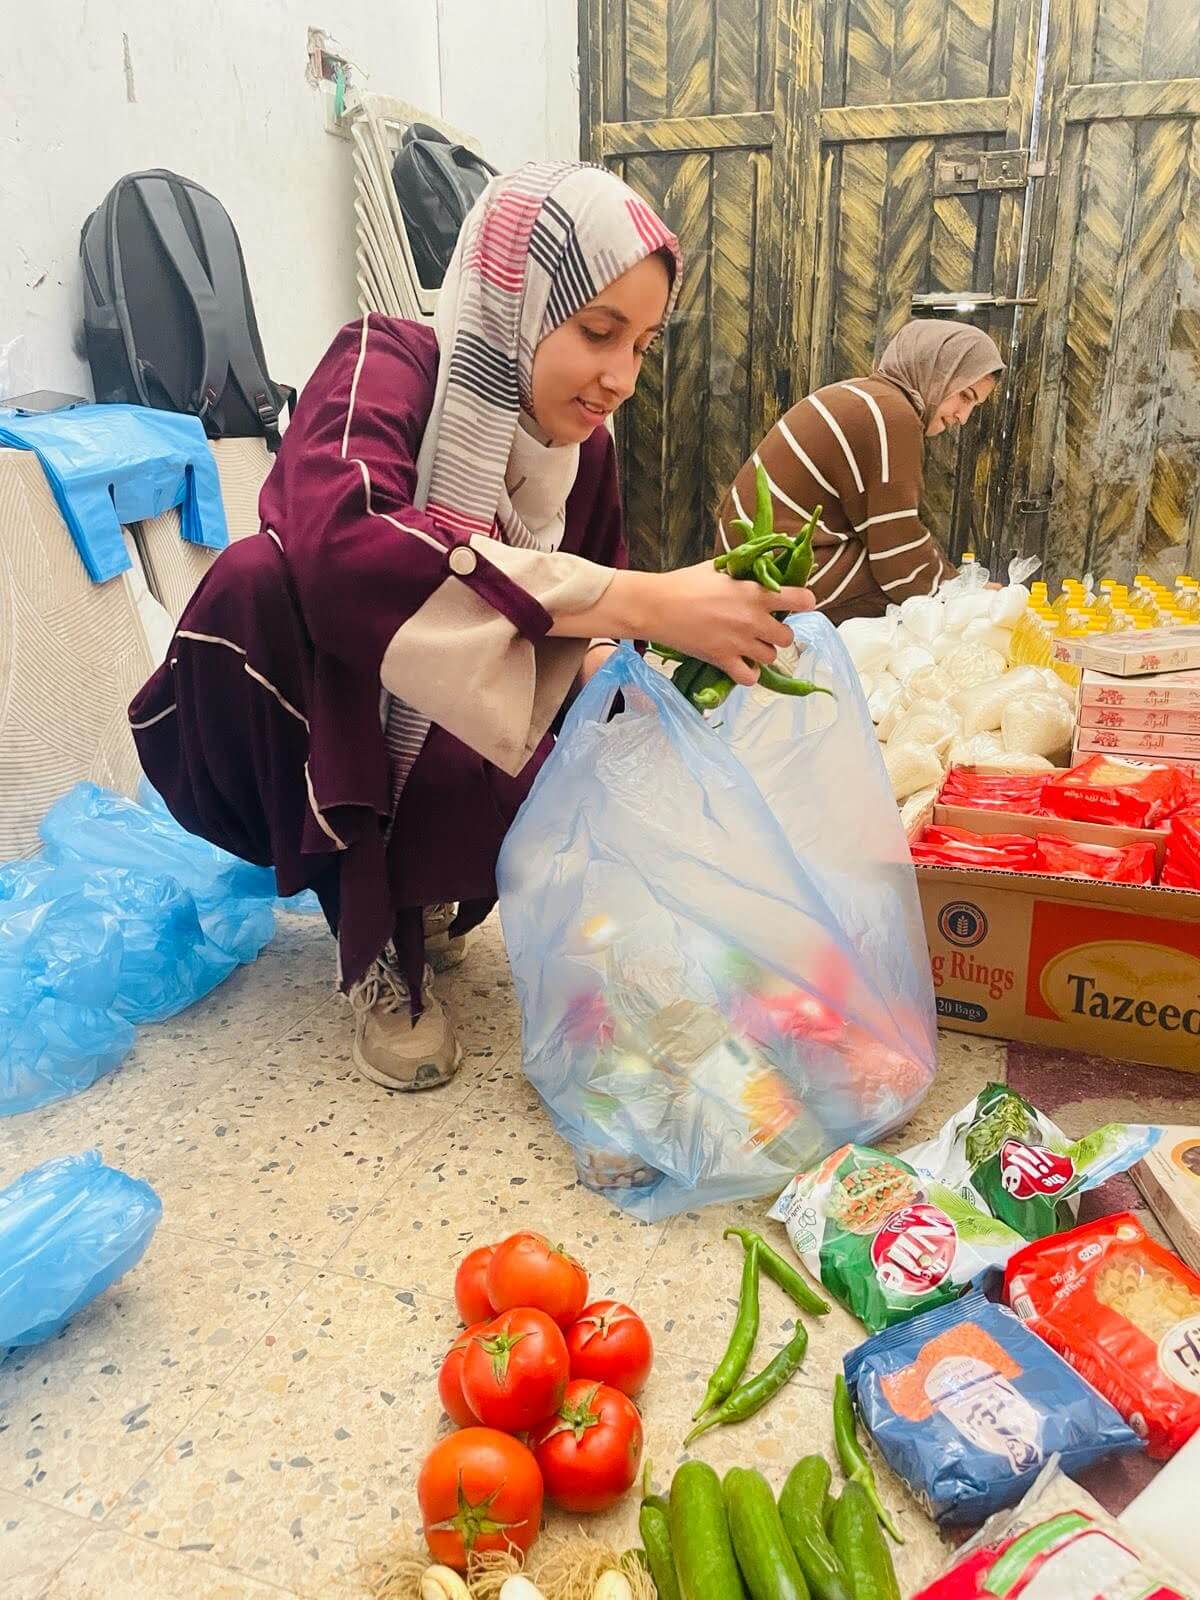 The photo shows Palestinian women taking vegetables out of bags.